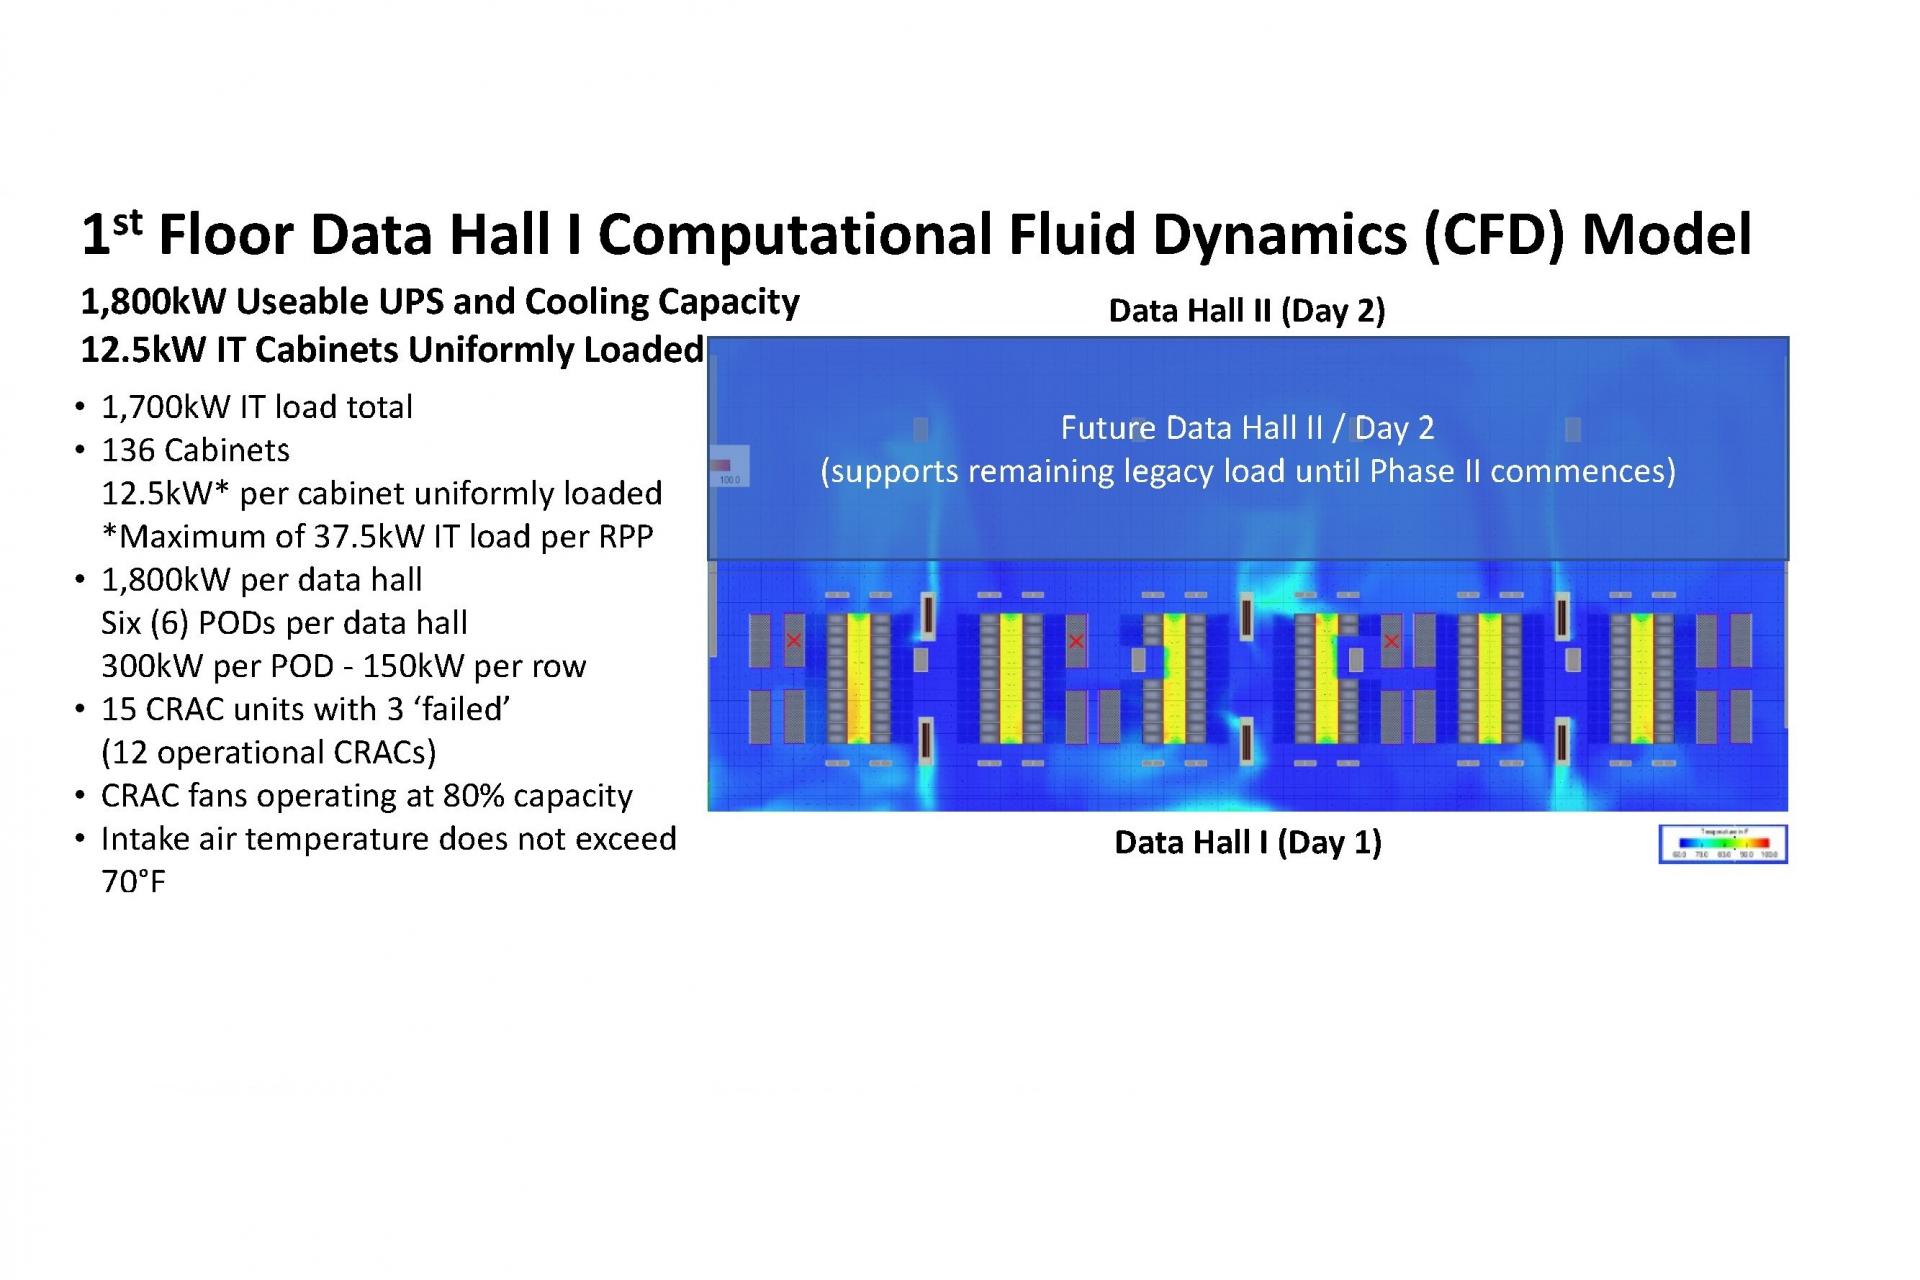 Computational Fluid Dynamic (CFD) validates and test the design and critical airflow